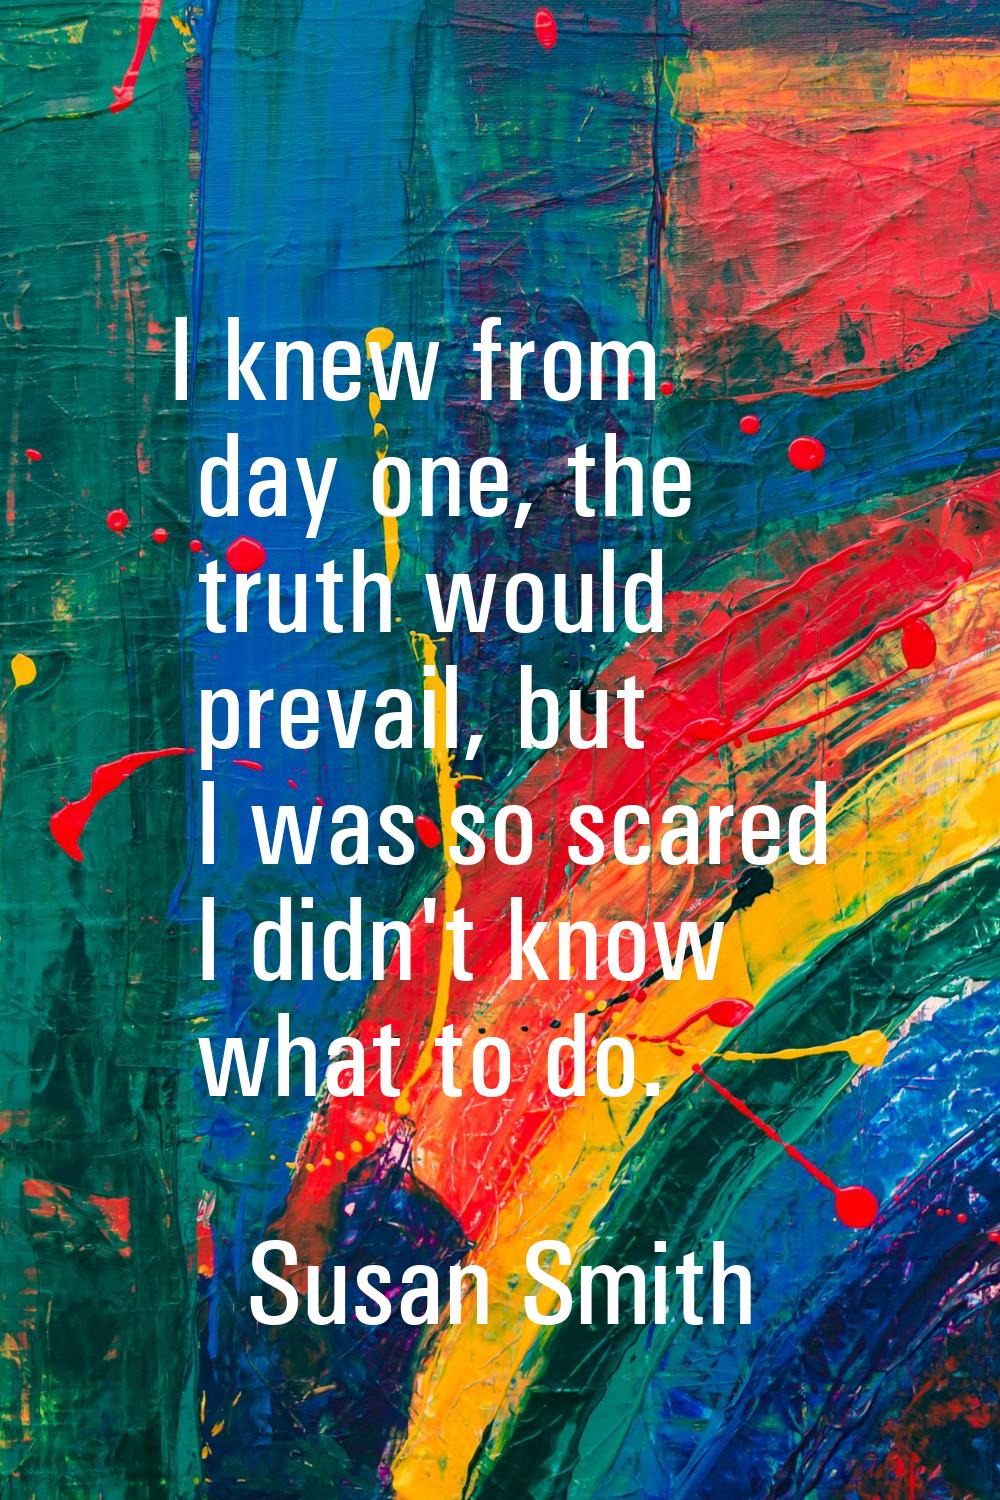 I knew from day one, the truth would prevail, but I was so scared I didn't know what to do.